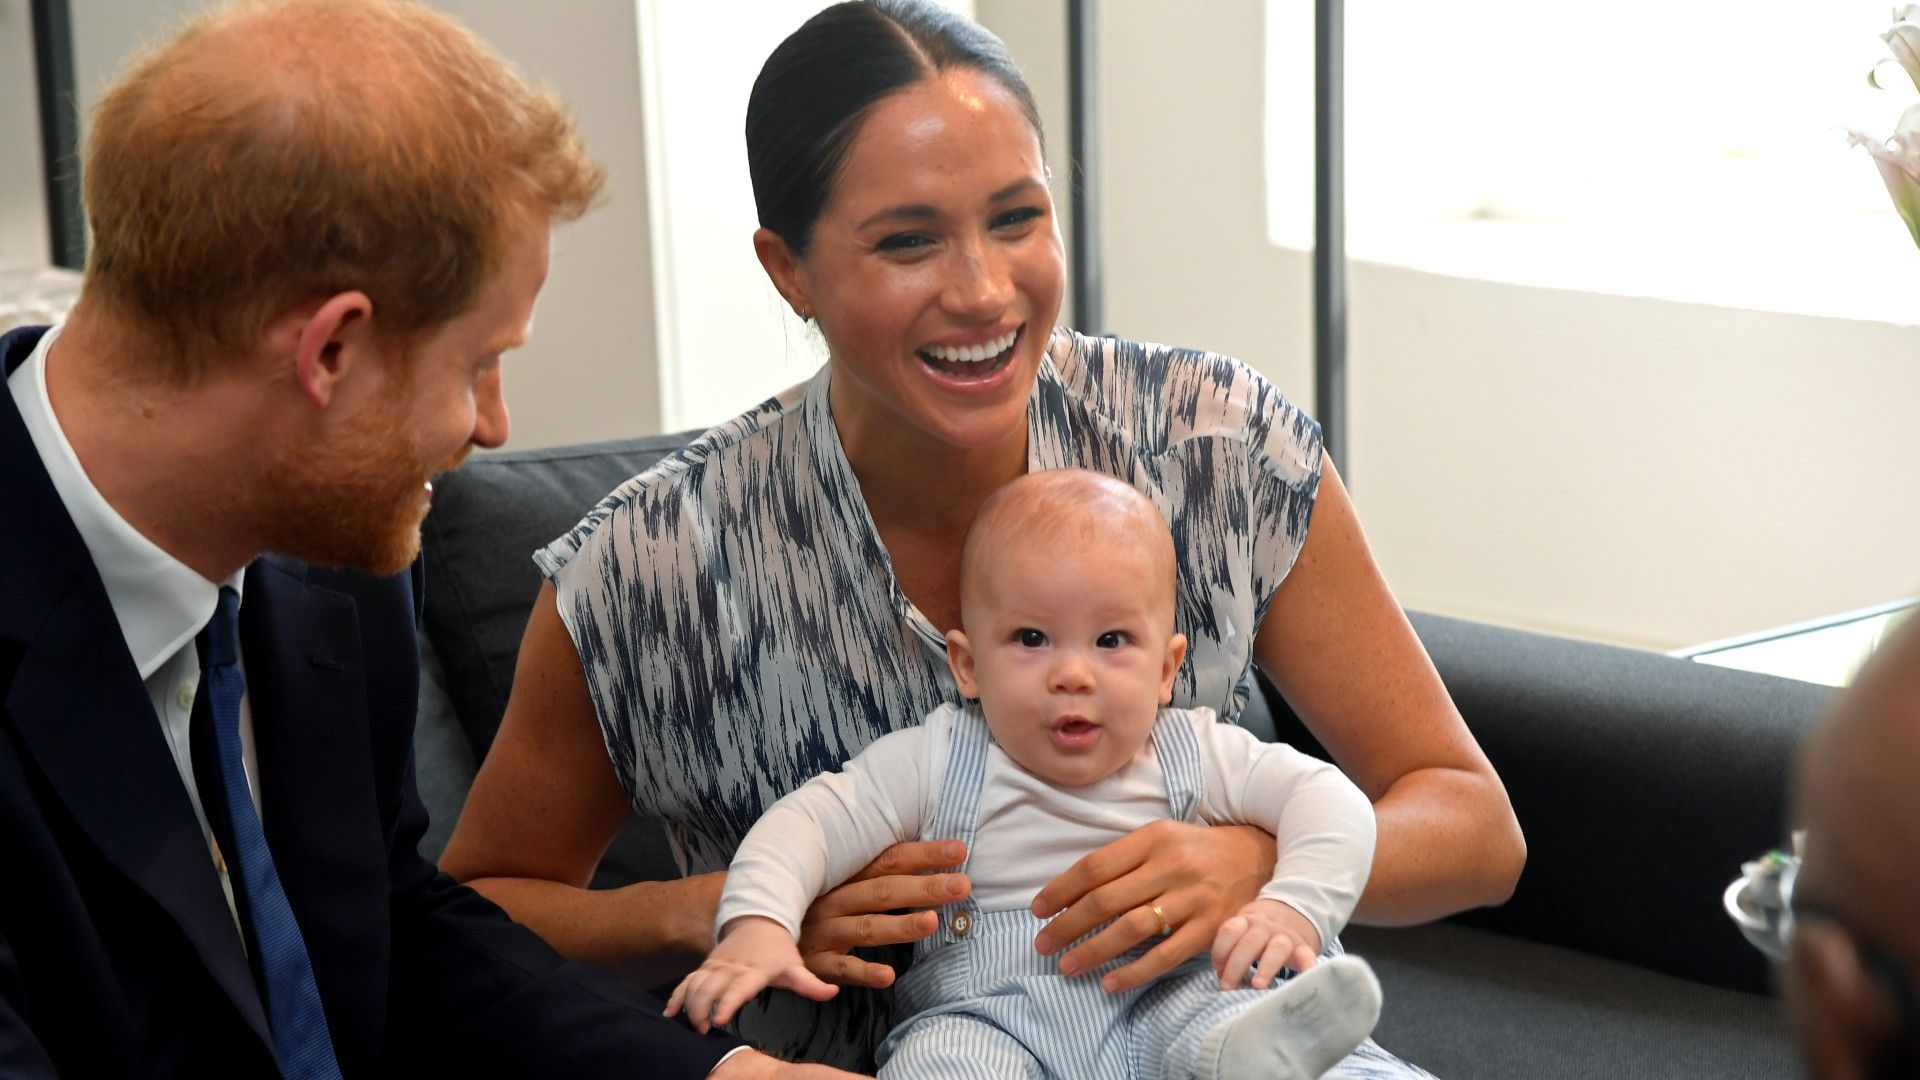 <p>                     Prince Archie's arrival in 2019 turned Prince Harry and Meghan Markle from a couple of loved-up newlyweds to a family. They would grow their brood in in 2021, when Princess Lilibet was born.                   </p>                                      <p>                     The Sussexes tend to keep their children out of the spotlight, which is what makes this sweet photo of Mum, Dad and Archie all the more heart-warming.                   </p>                                      <p>                     Everyone - including the young prince - are all smiles during an official meeting with Desmond Tutu.                   </p>